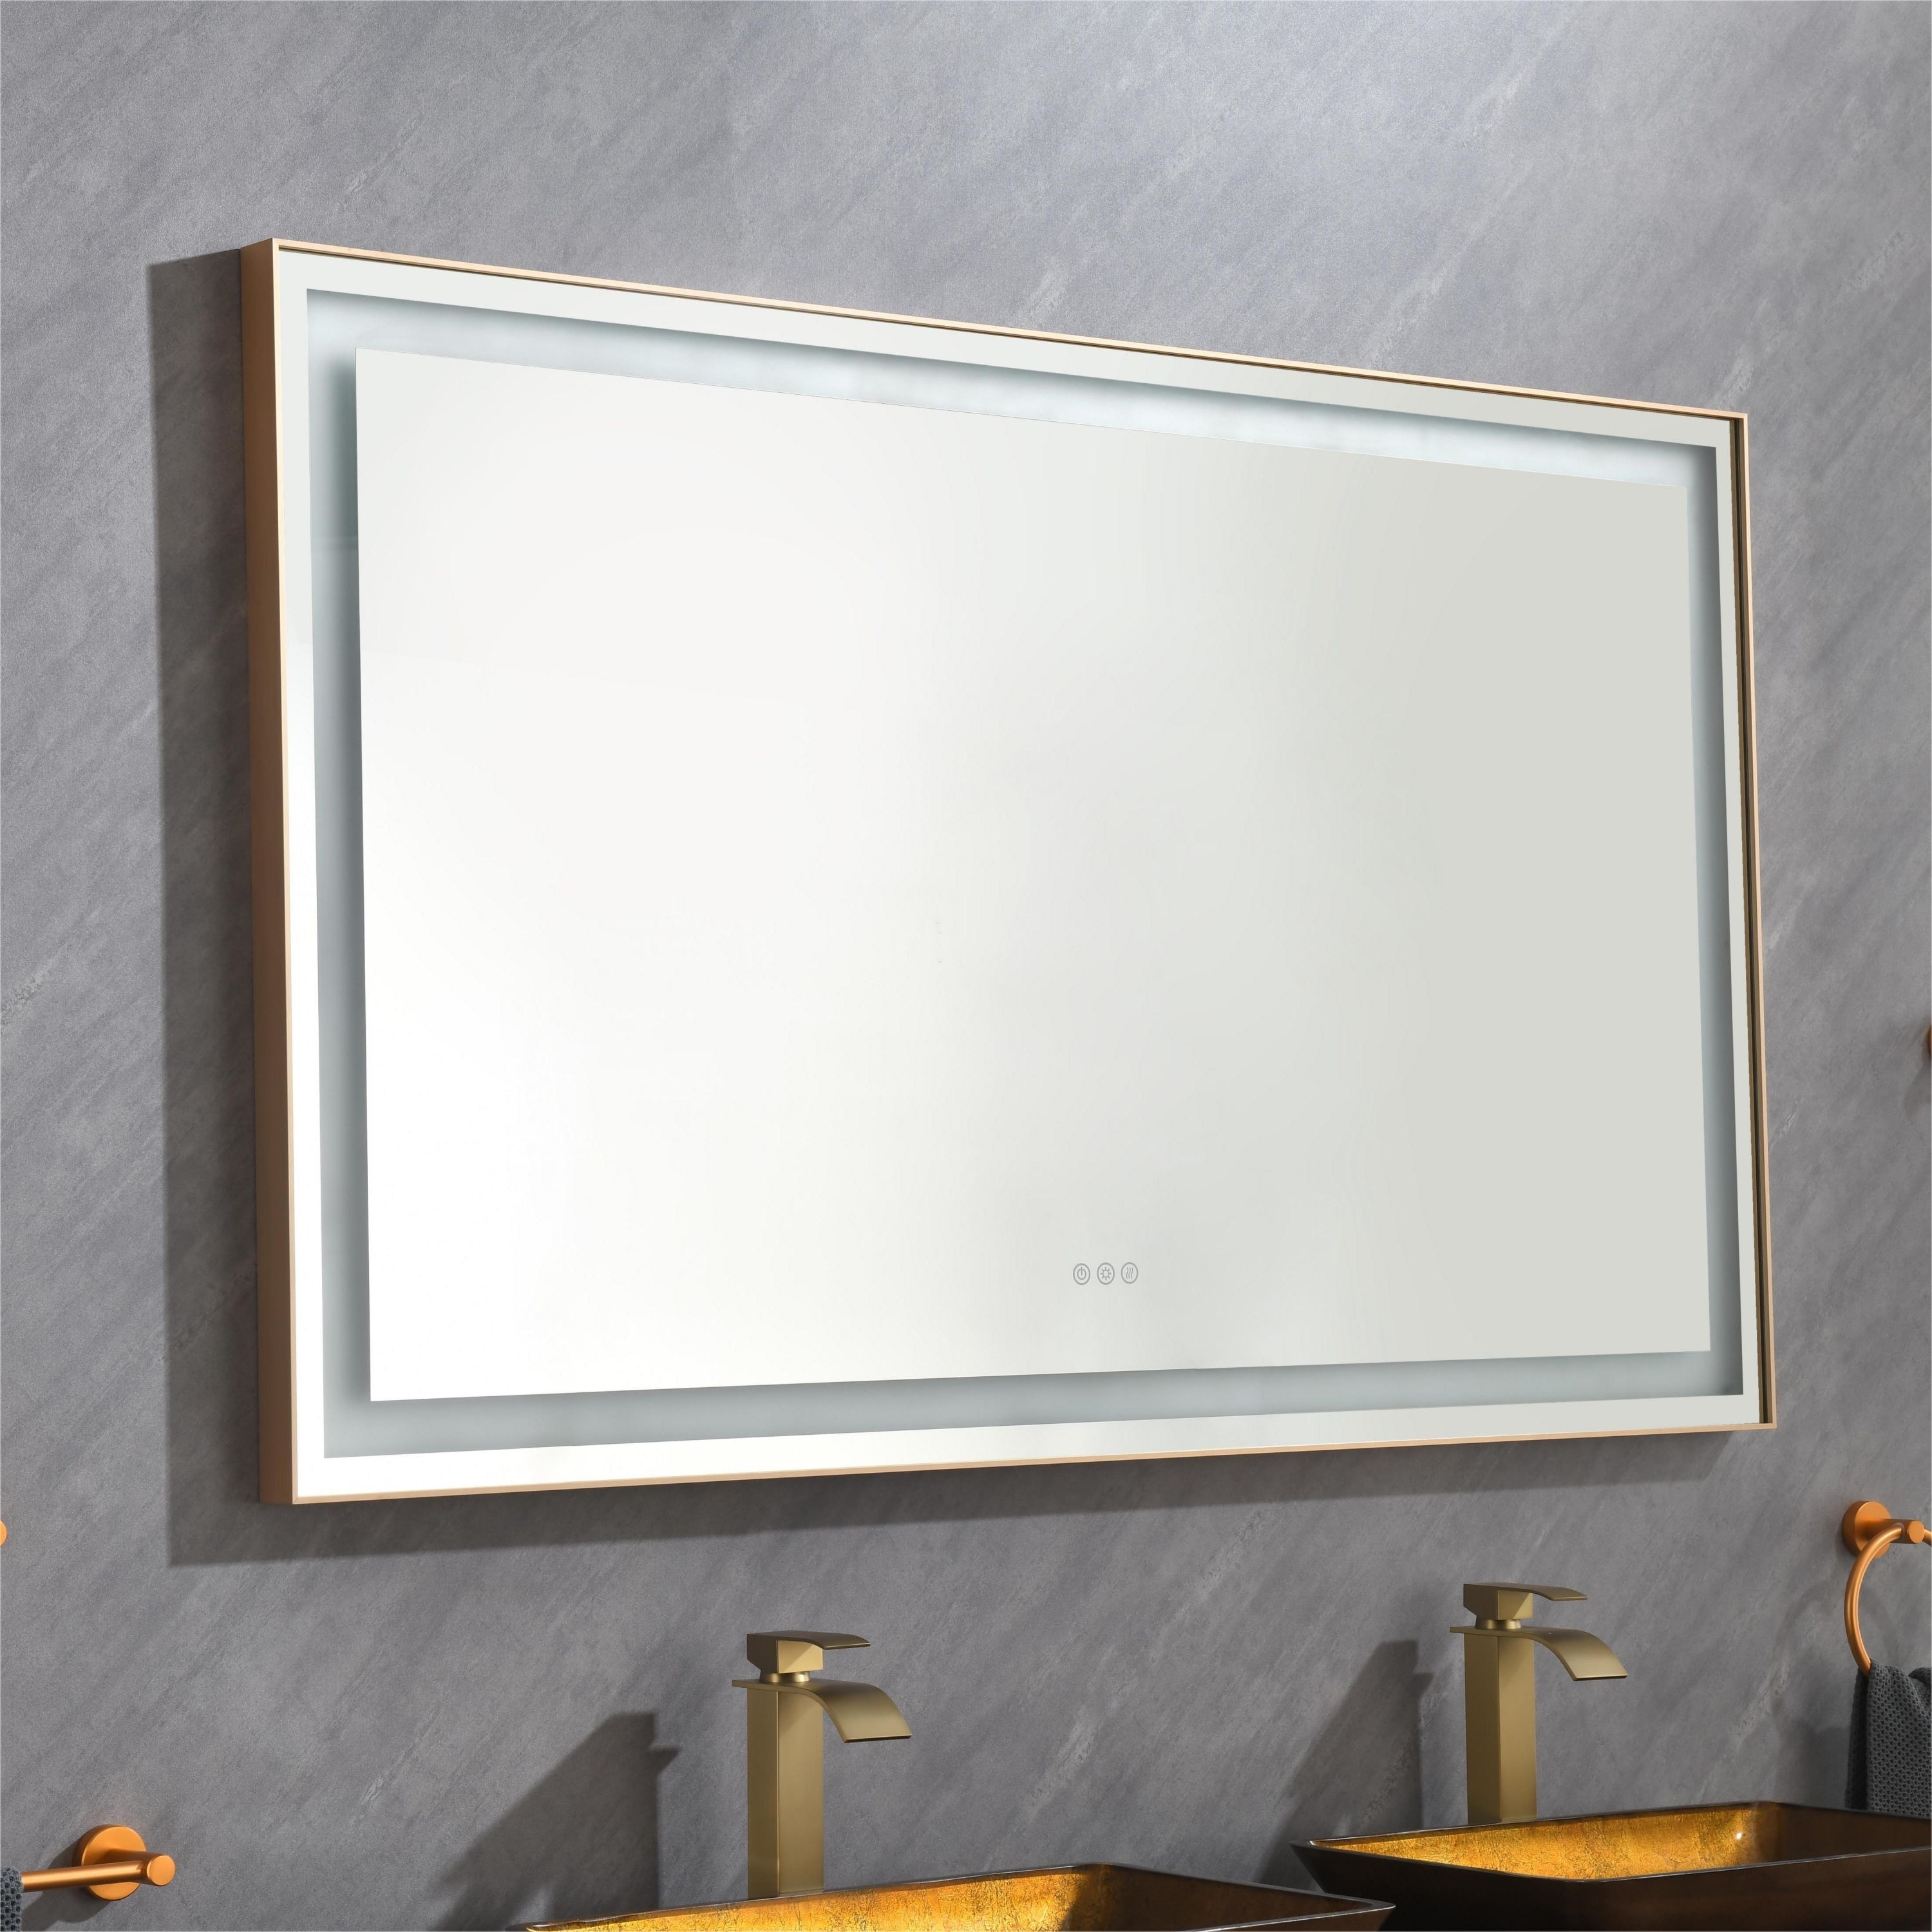 https://ak1.ostkcdn.com/images/products/is/images/direct/f705edd72892d7a07636296249078815e1ded291/Toolkiss-Golden-Frame-Anti-Fog-Vanity-Mirror-with-Adjustable-Light.jpg